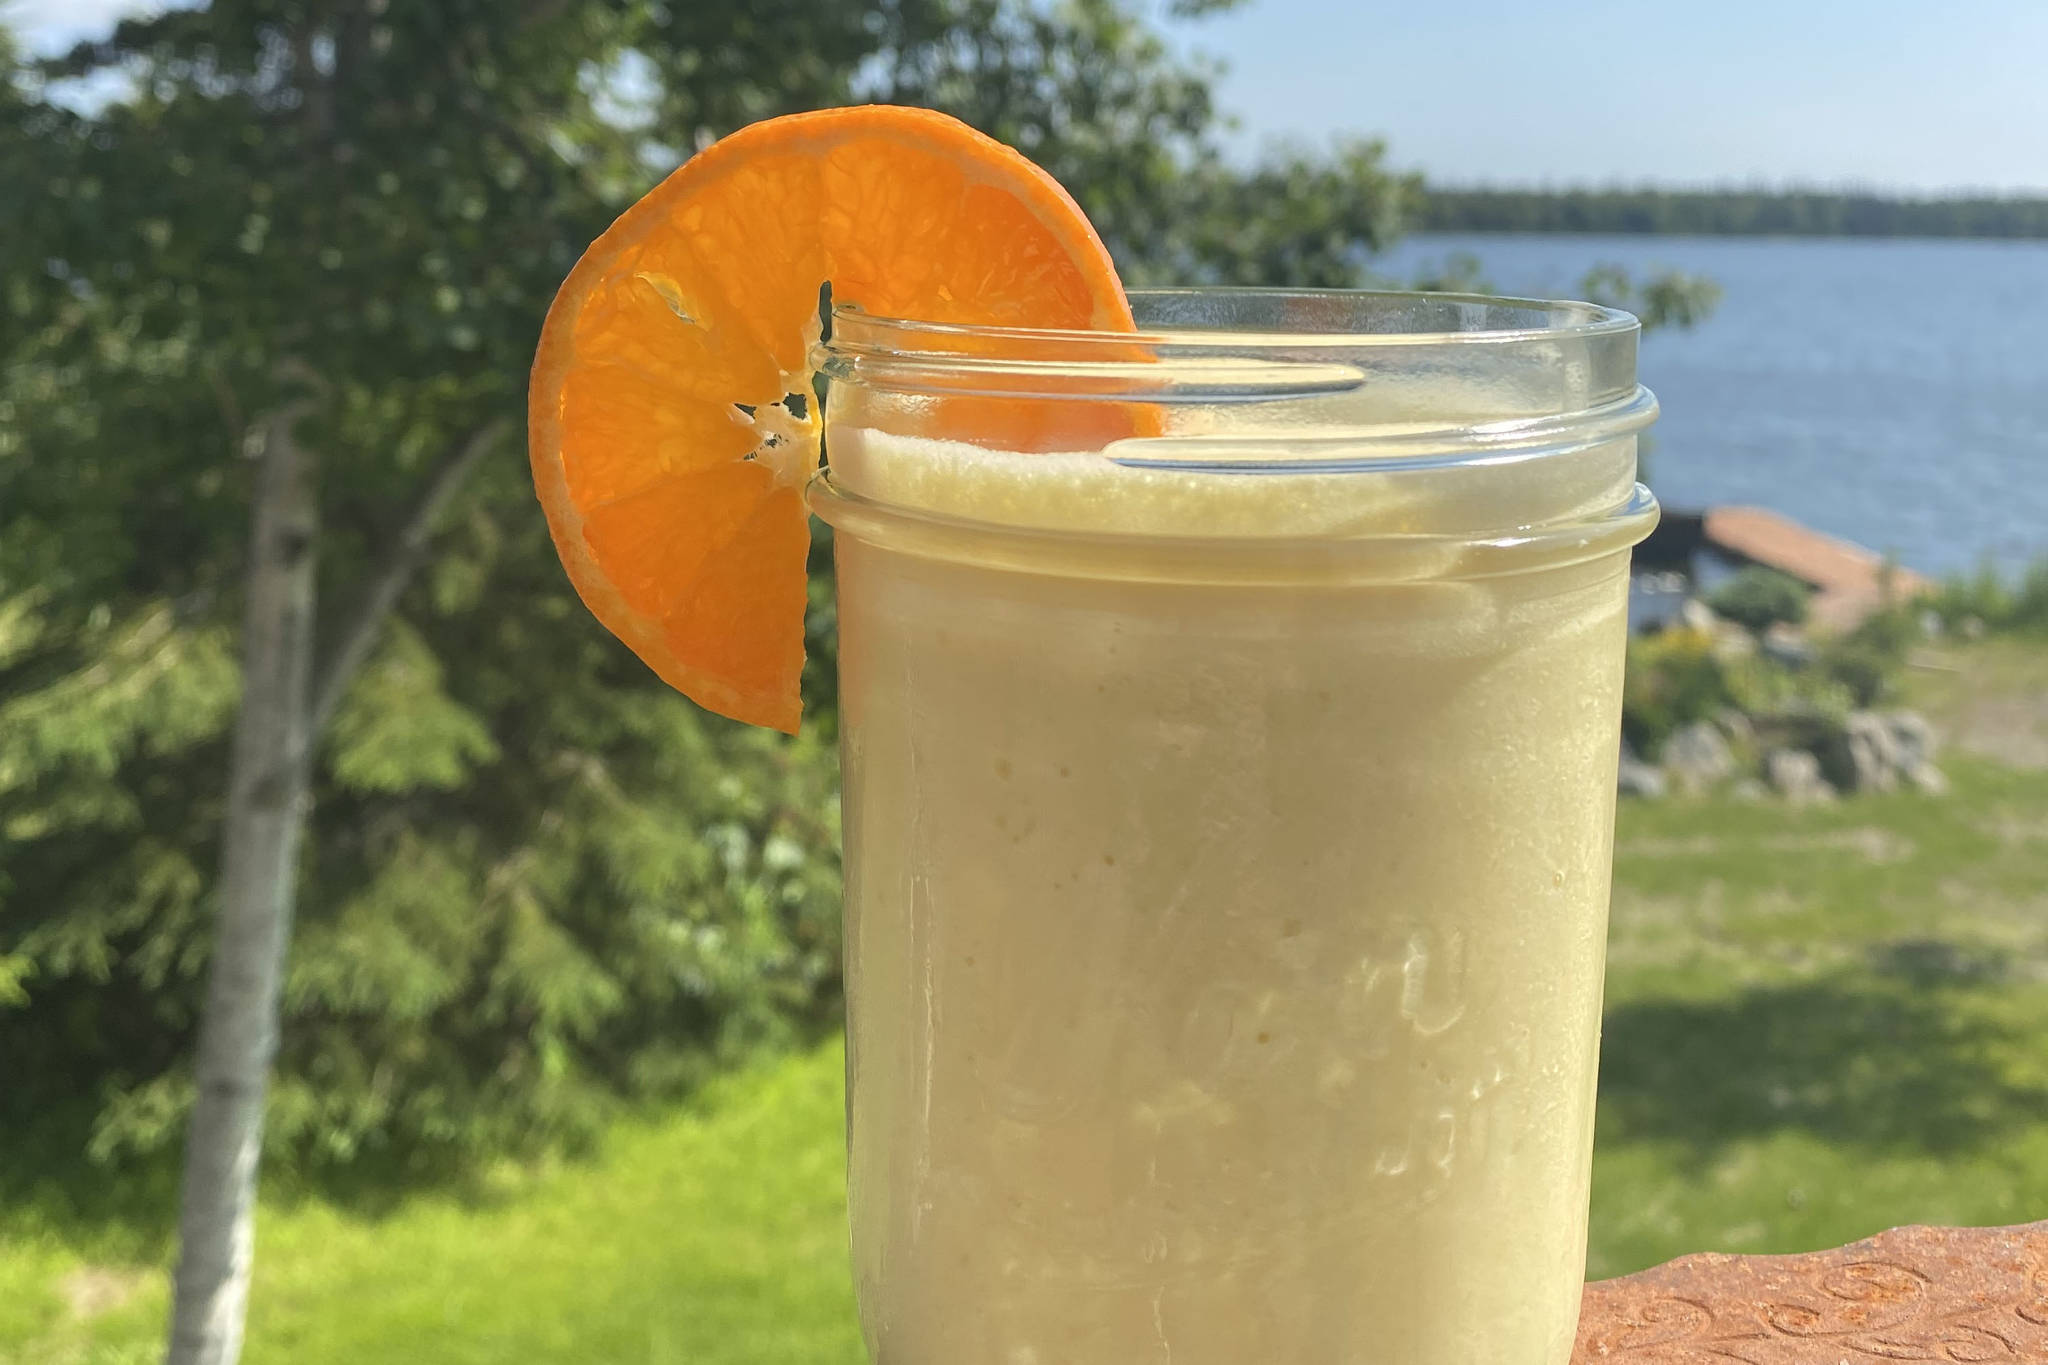 This orange Julius swaps out the traditional egg whites with sweetened condensed milk, for a tangy and safe summer treat. Photographed July 4, 2021, in Nikiski, Alaska. (Photo by Tressa Dale/Peninsula Clarion)